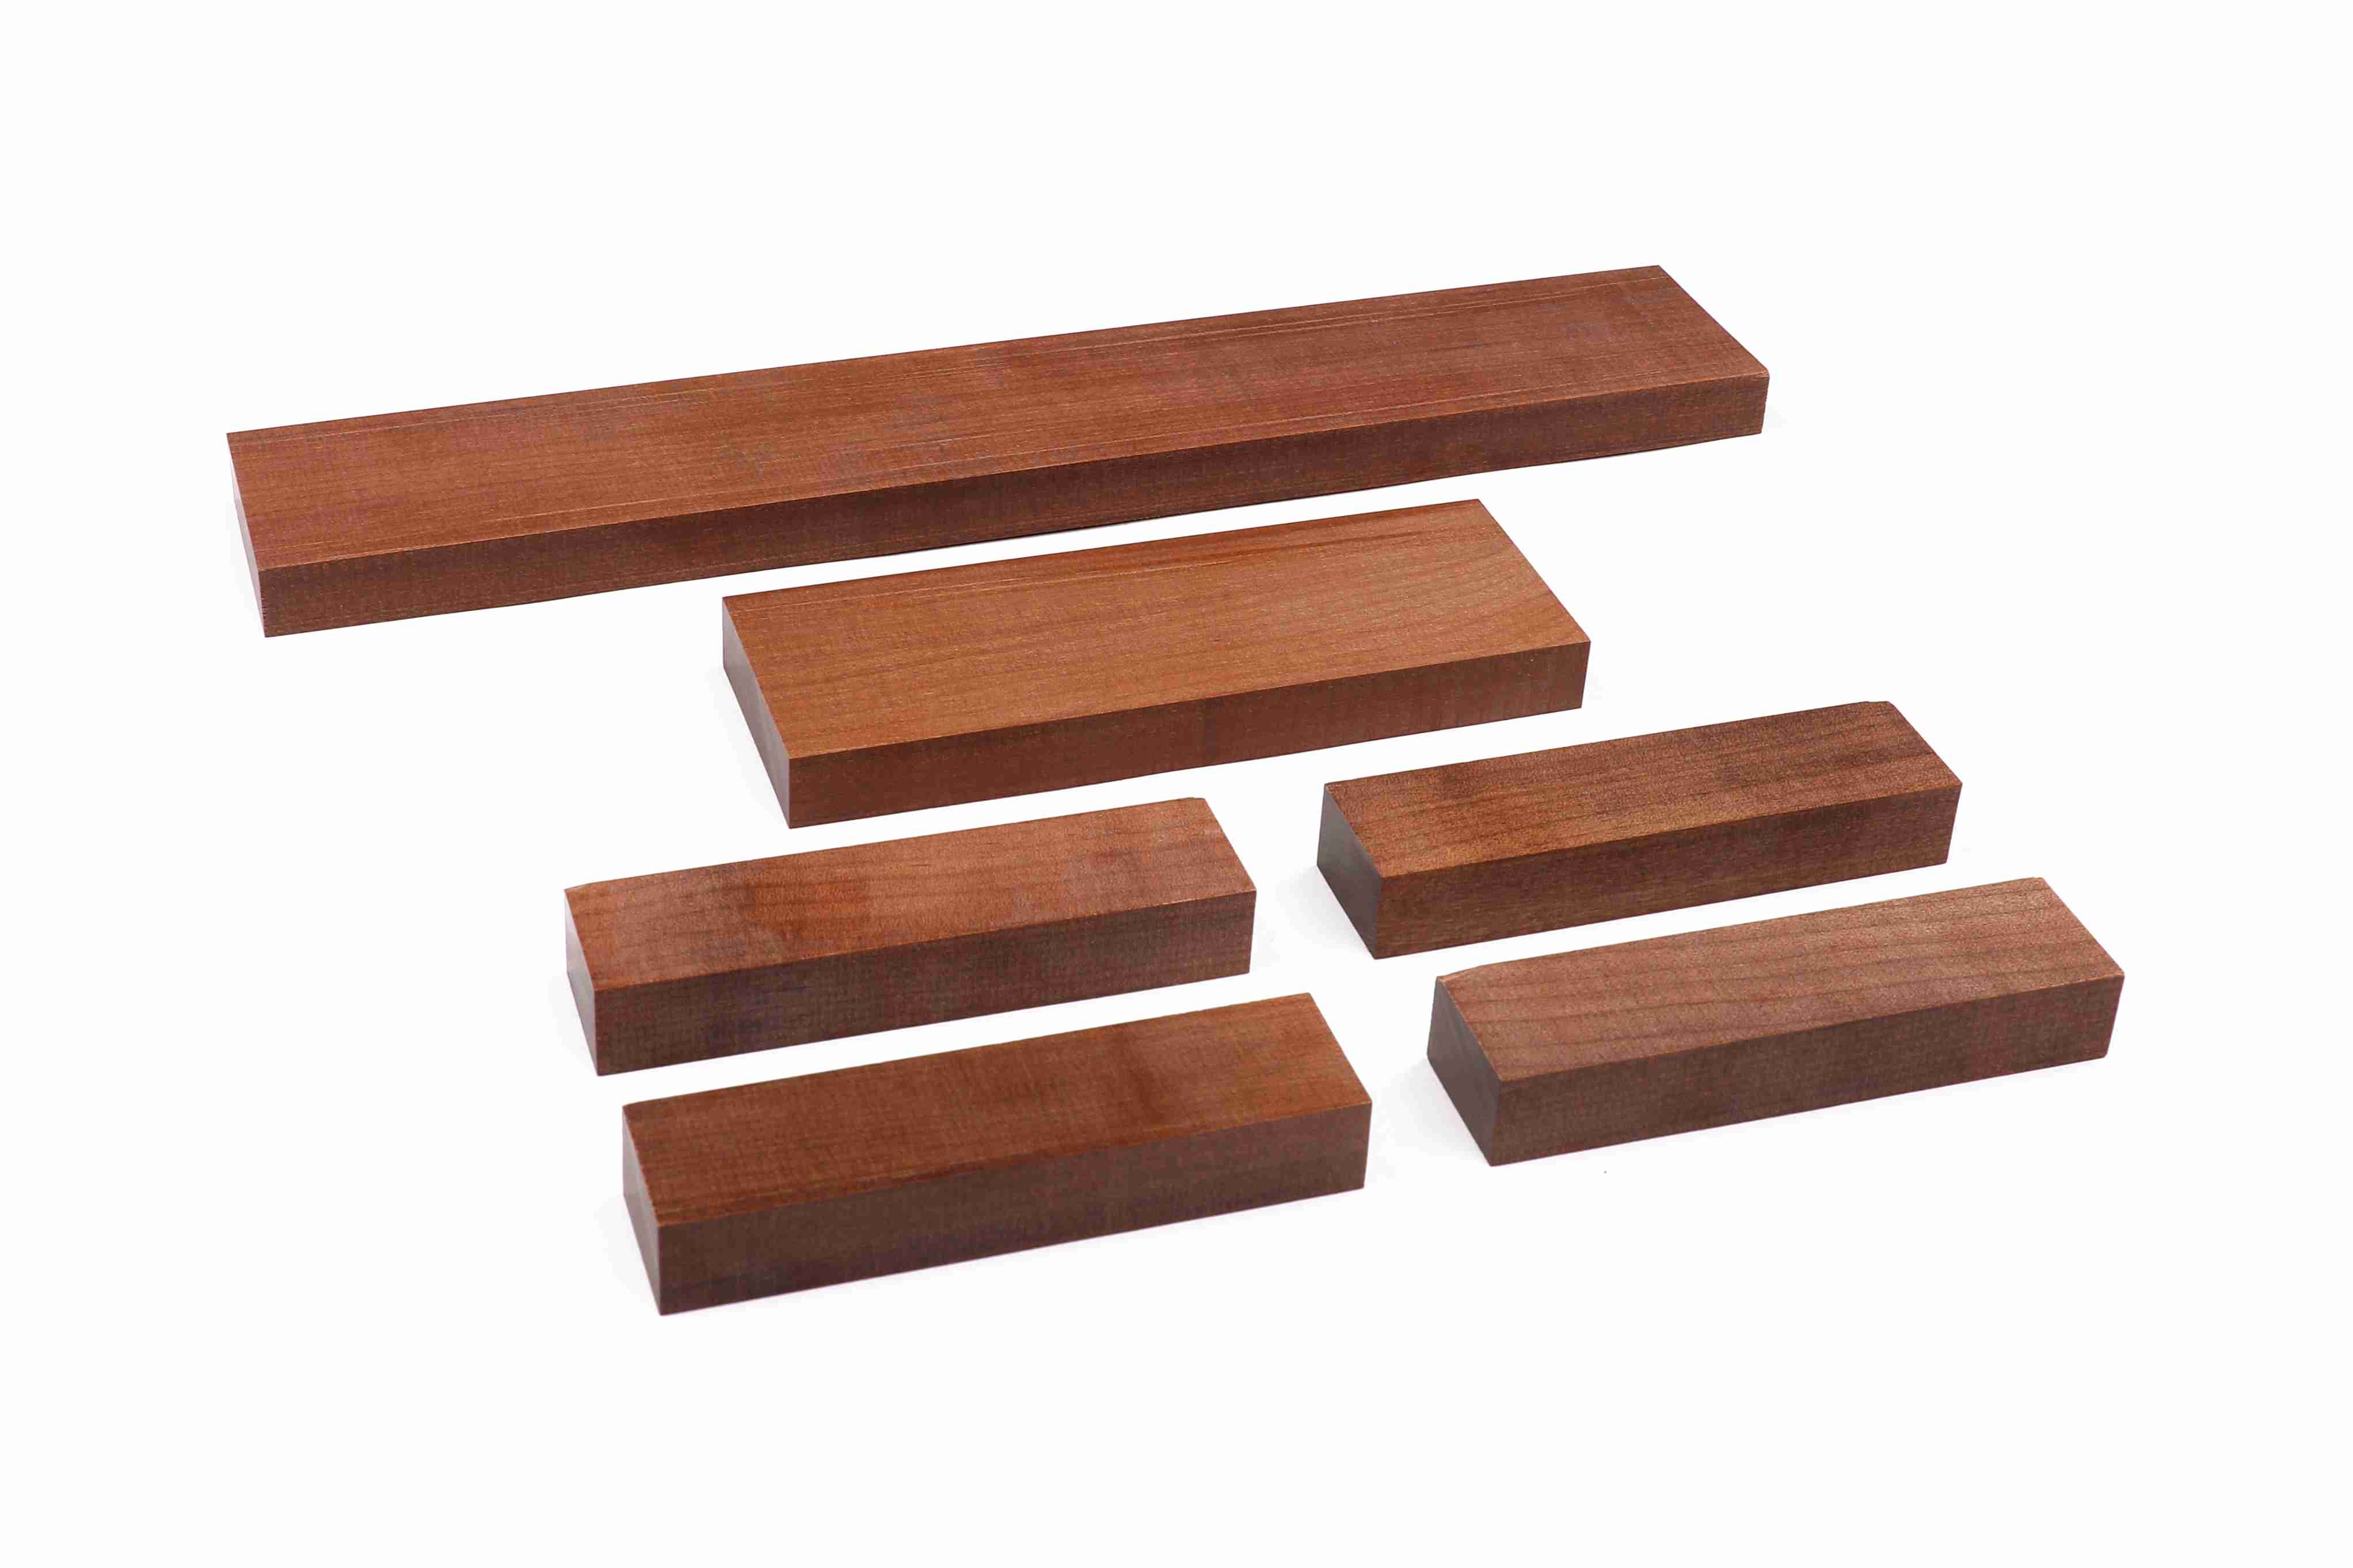 Square timbers from Sonowood maple for fingerboard, tailpiece and pegs